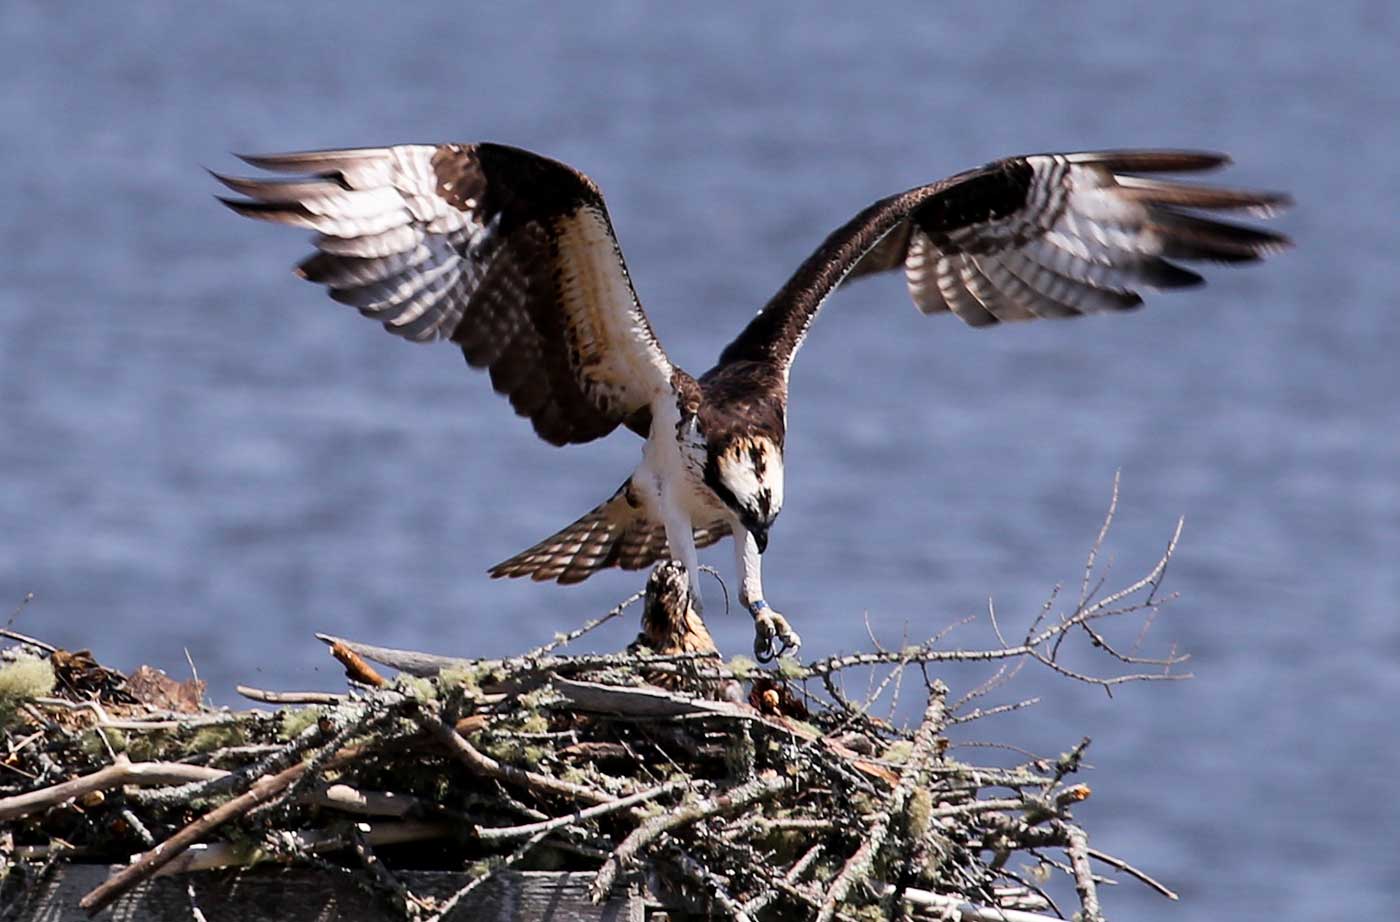 That's One Determined Osprey